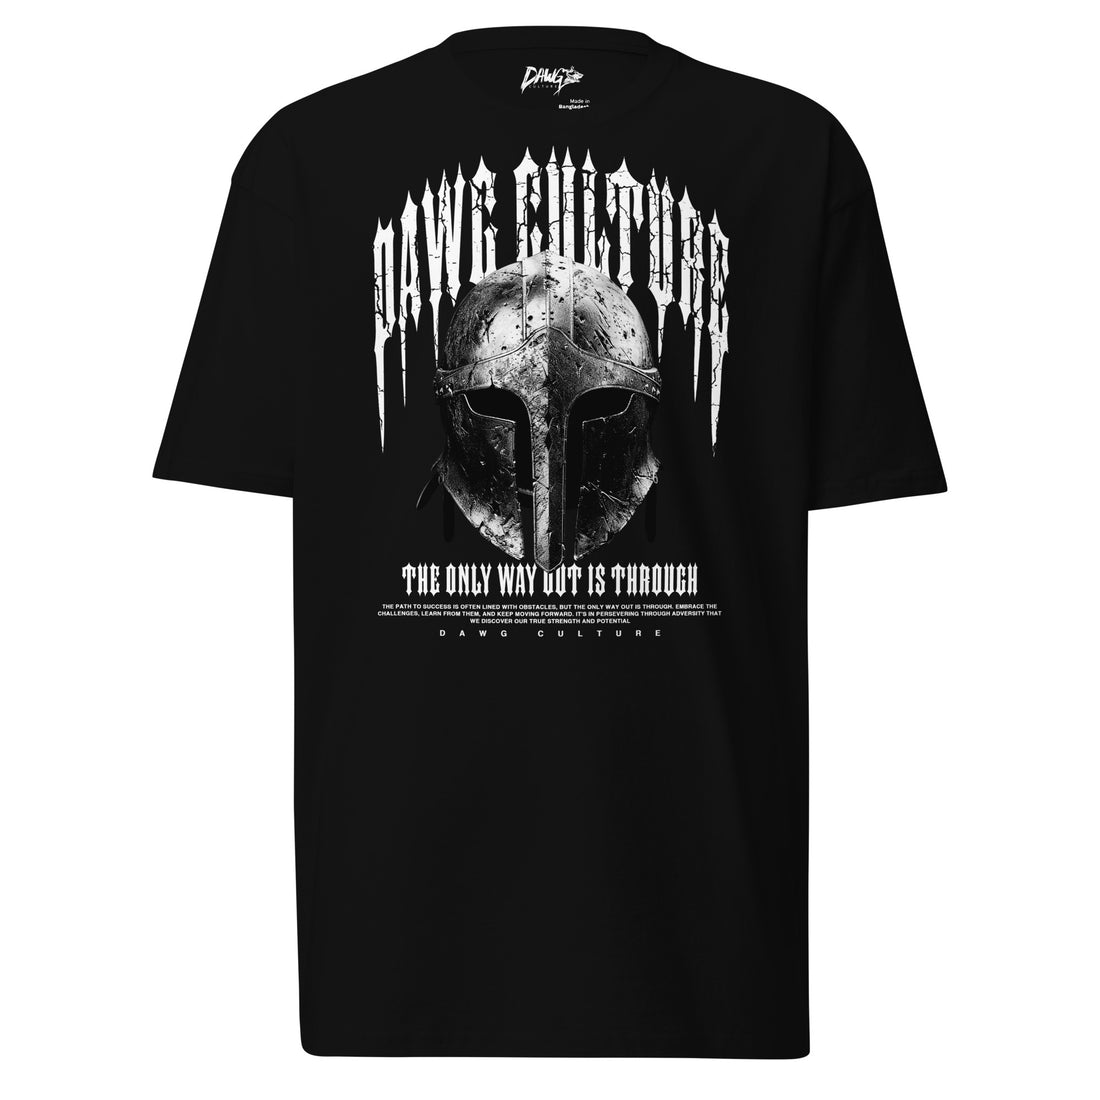 NEW "The Only Way Out is Through" Premium Heavyweight Tee